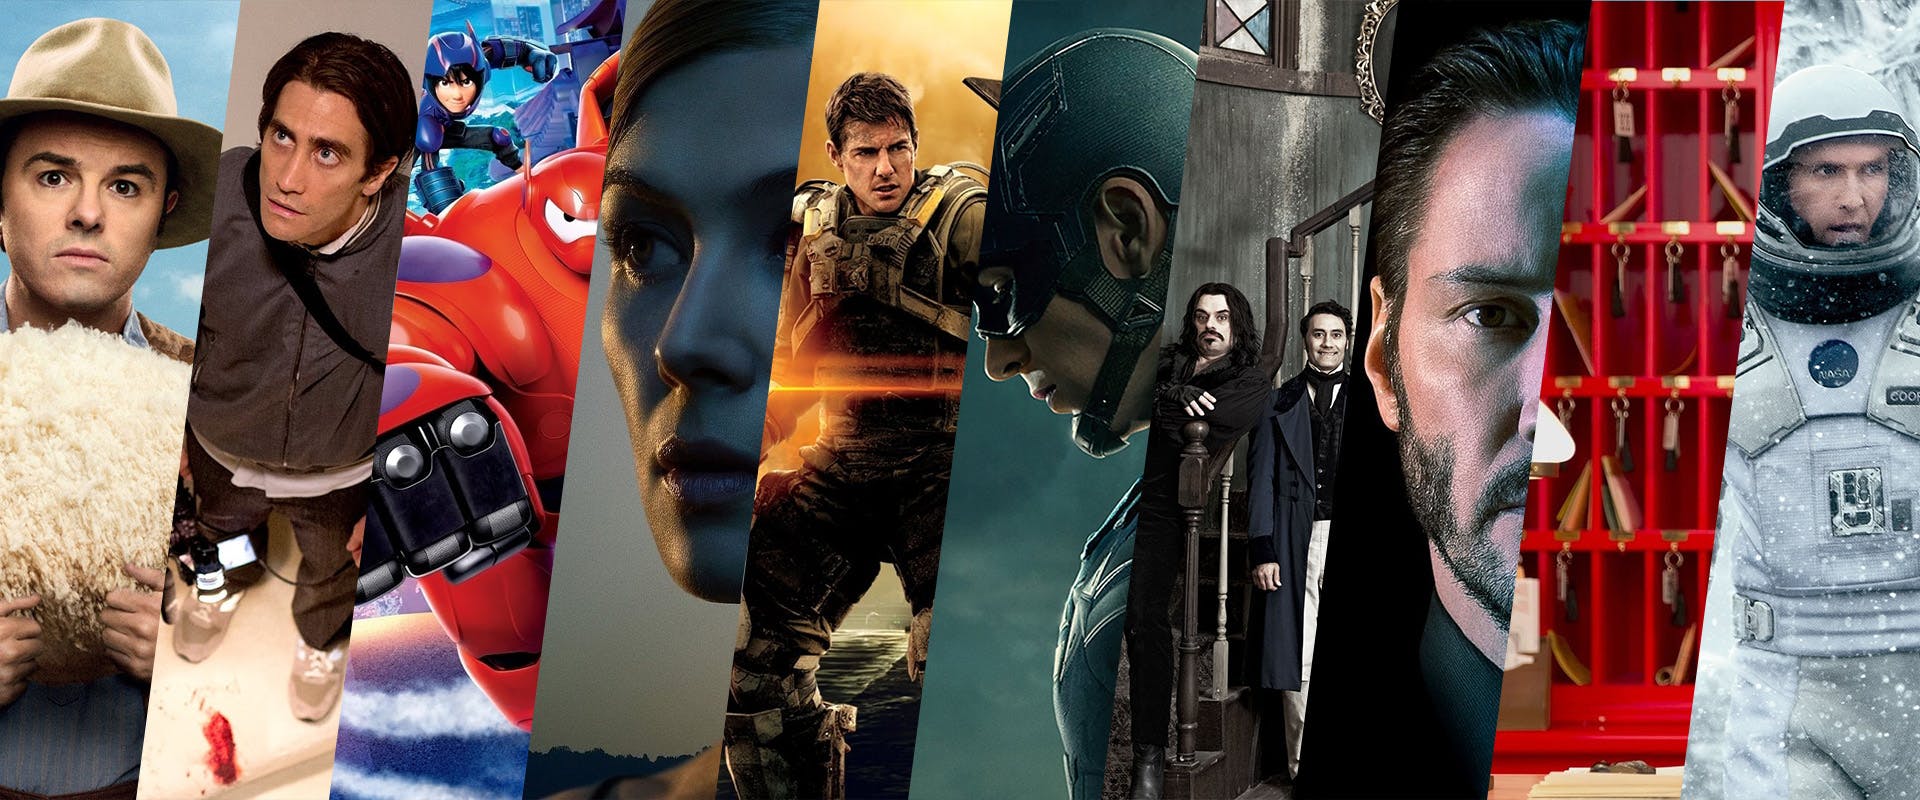 Top 10 Movies of 2014